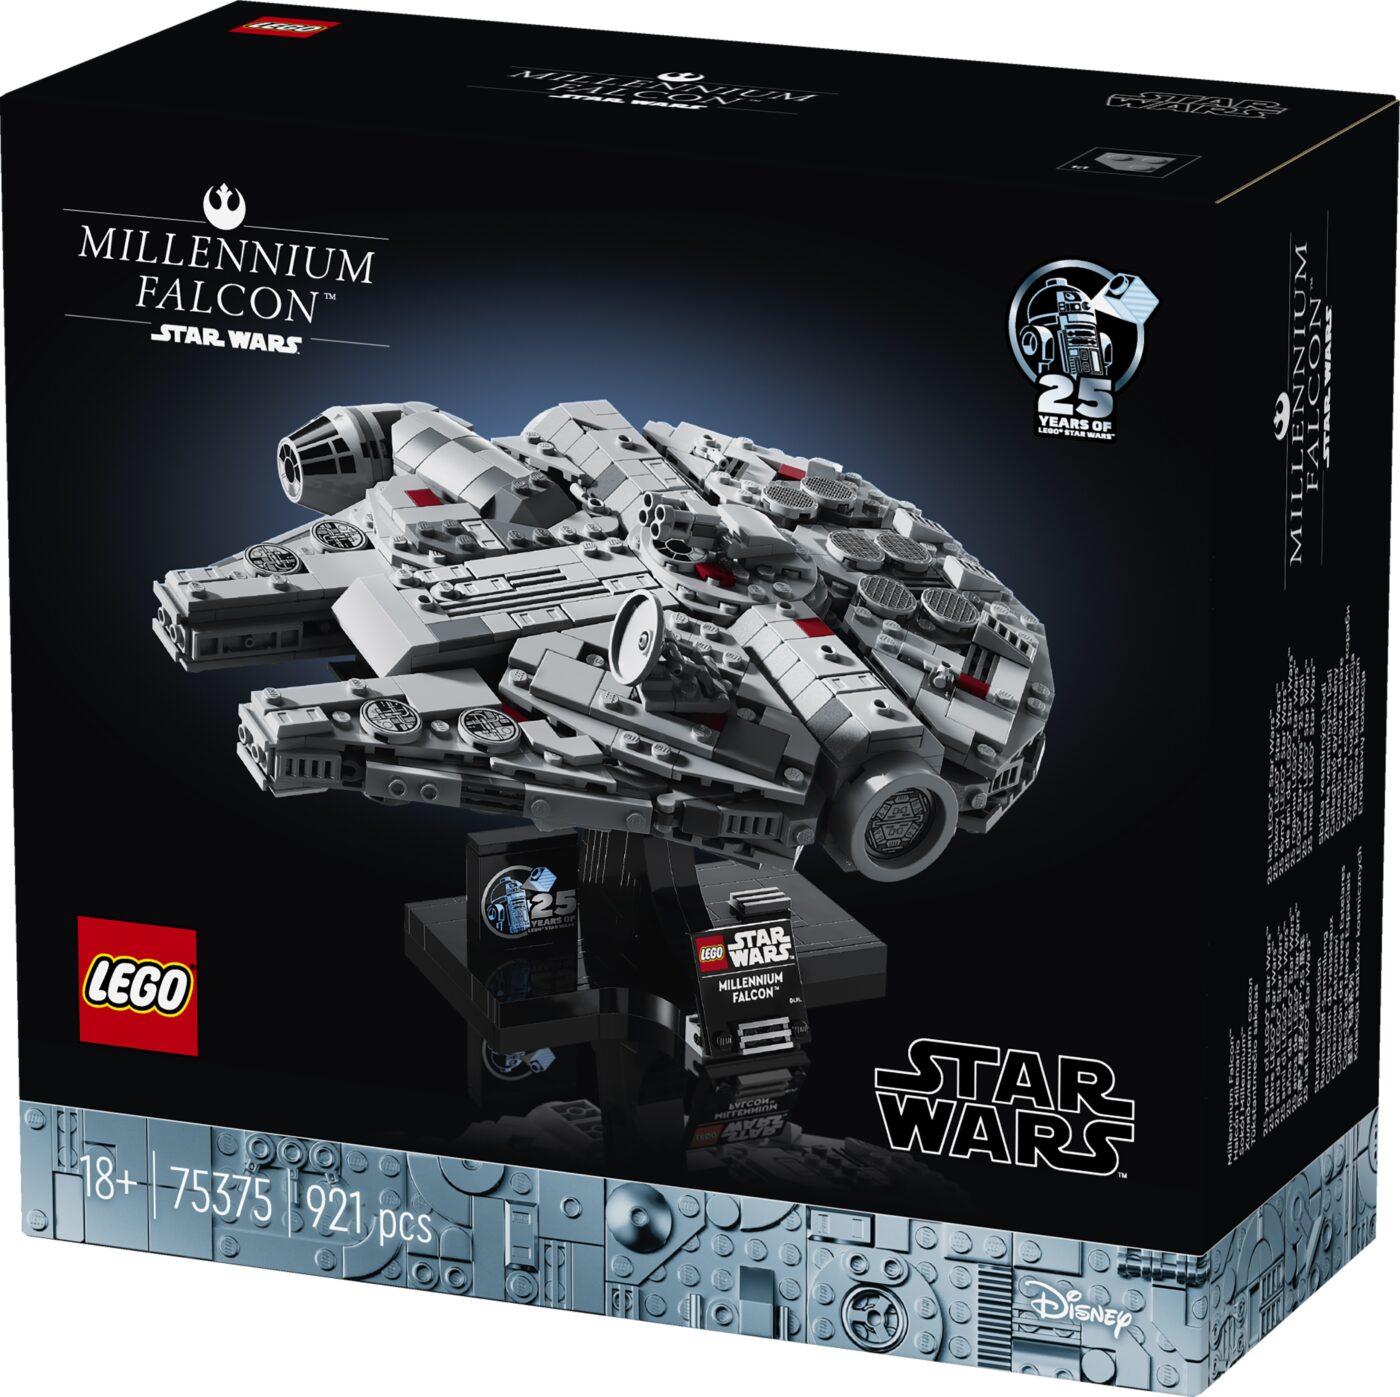 Entire lineup of LEGO Star Wars 25th anniversary set includes midi-scale Millennium Falcon, Tantive IV and the Invisible Hand!5